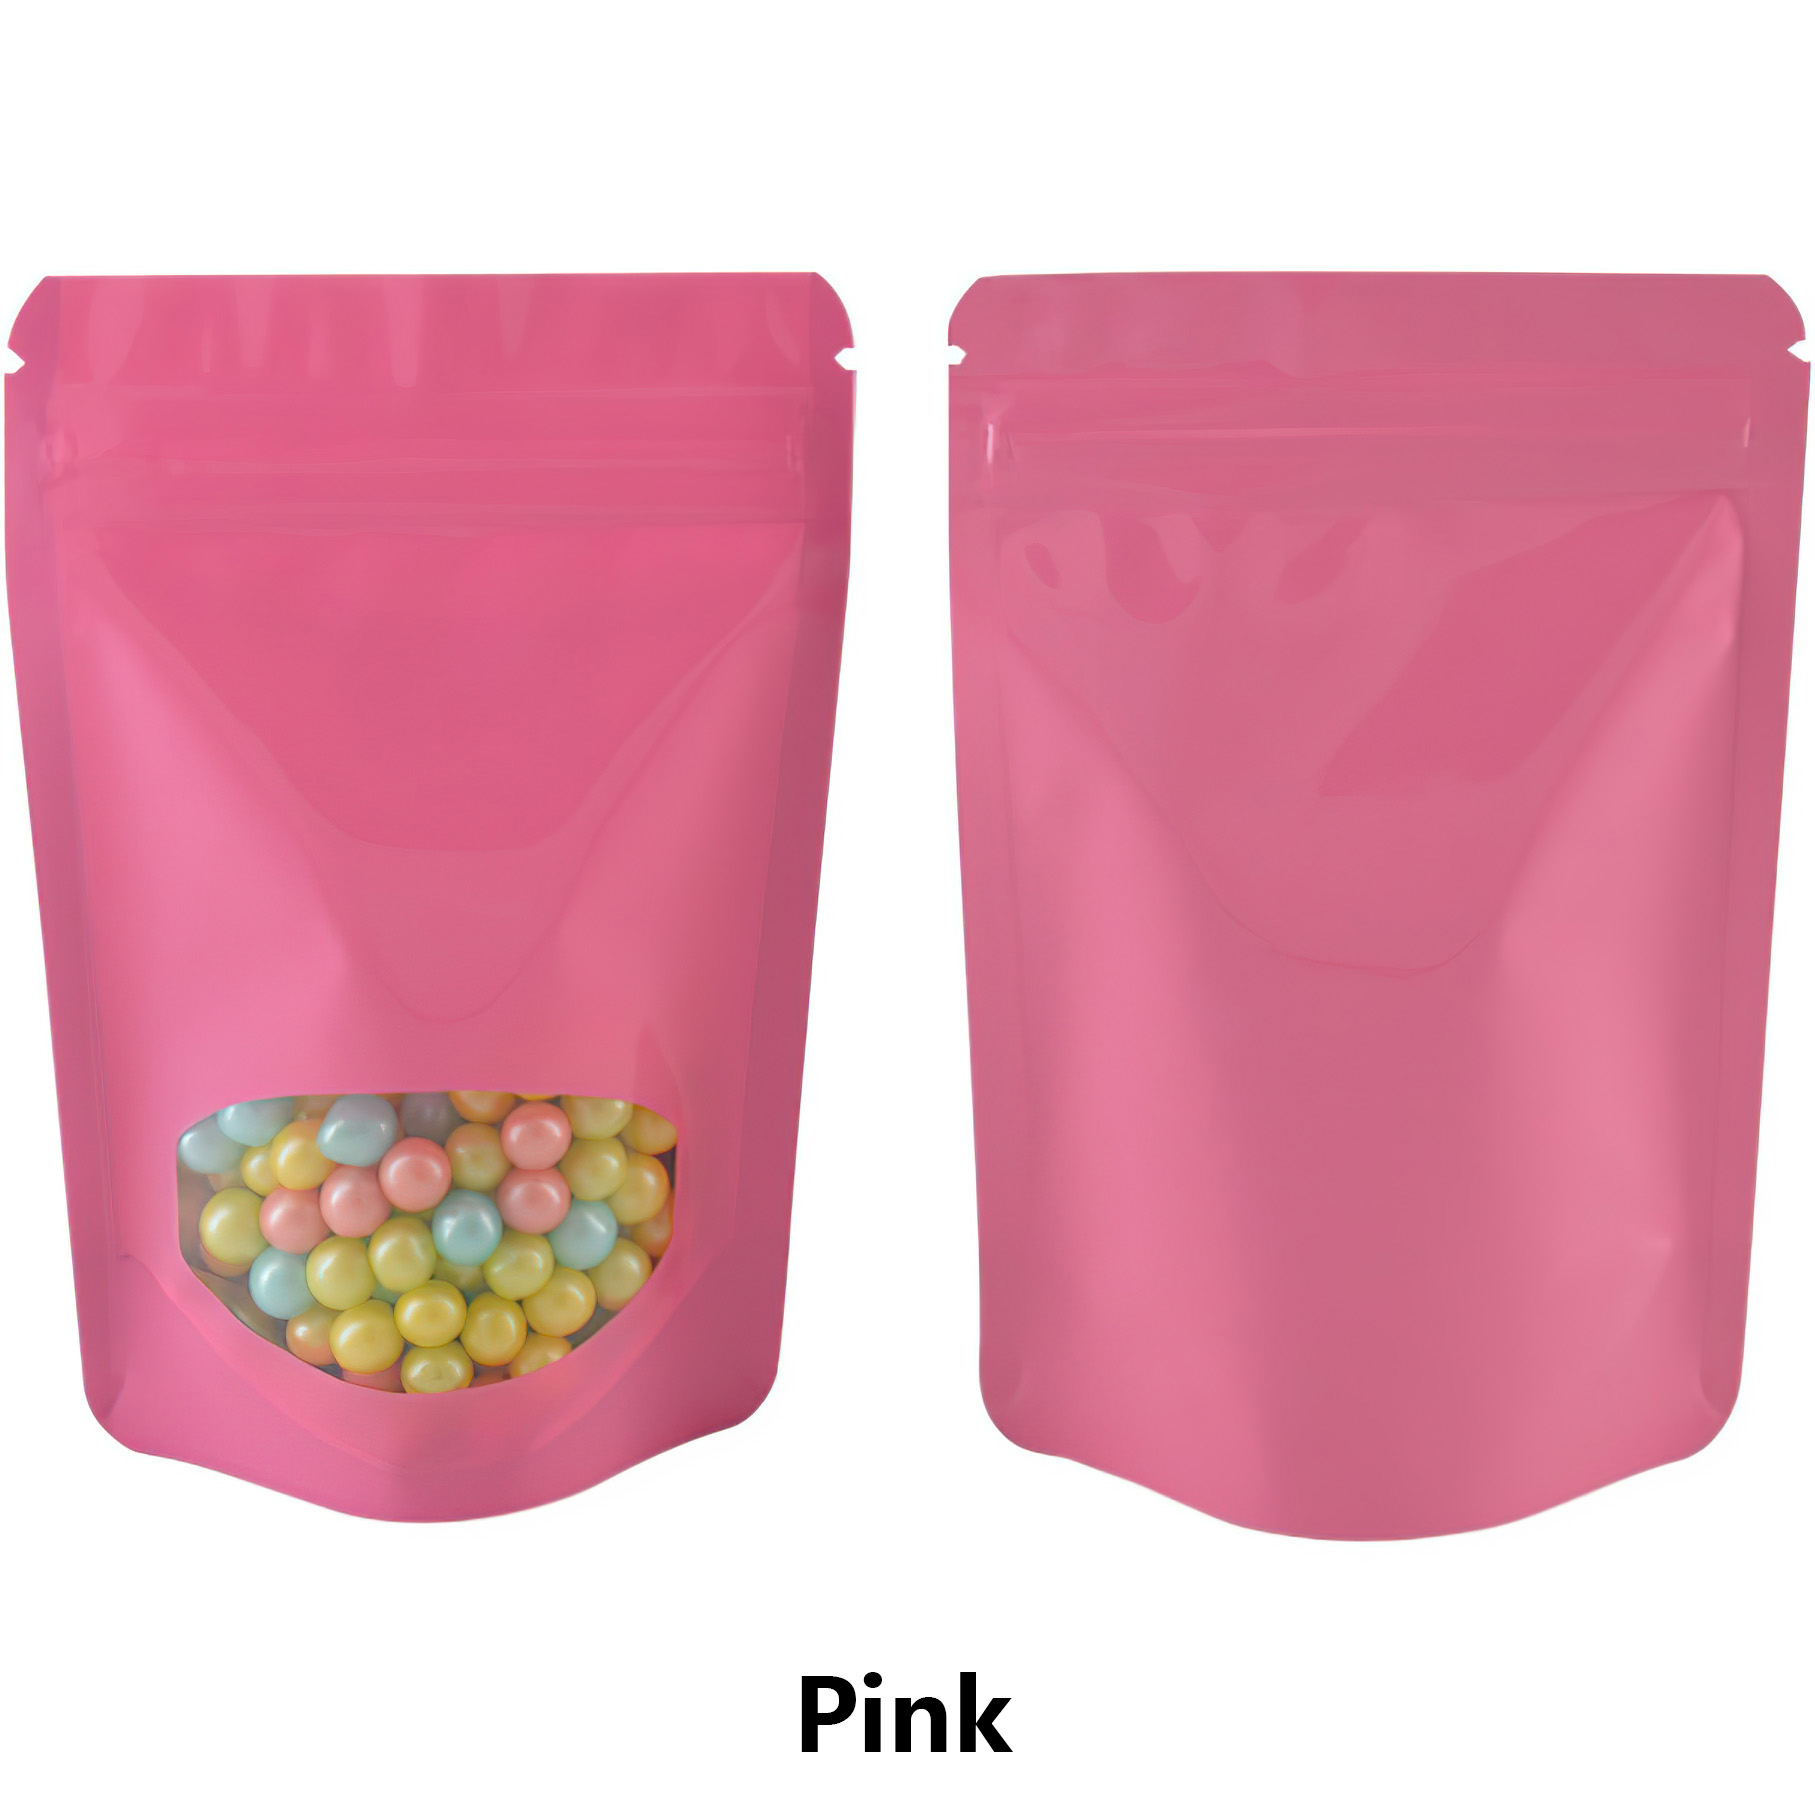 Colorful Stand up Ziplock Bag with Window, Pink